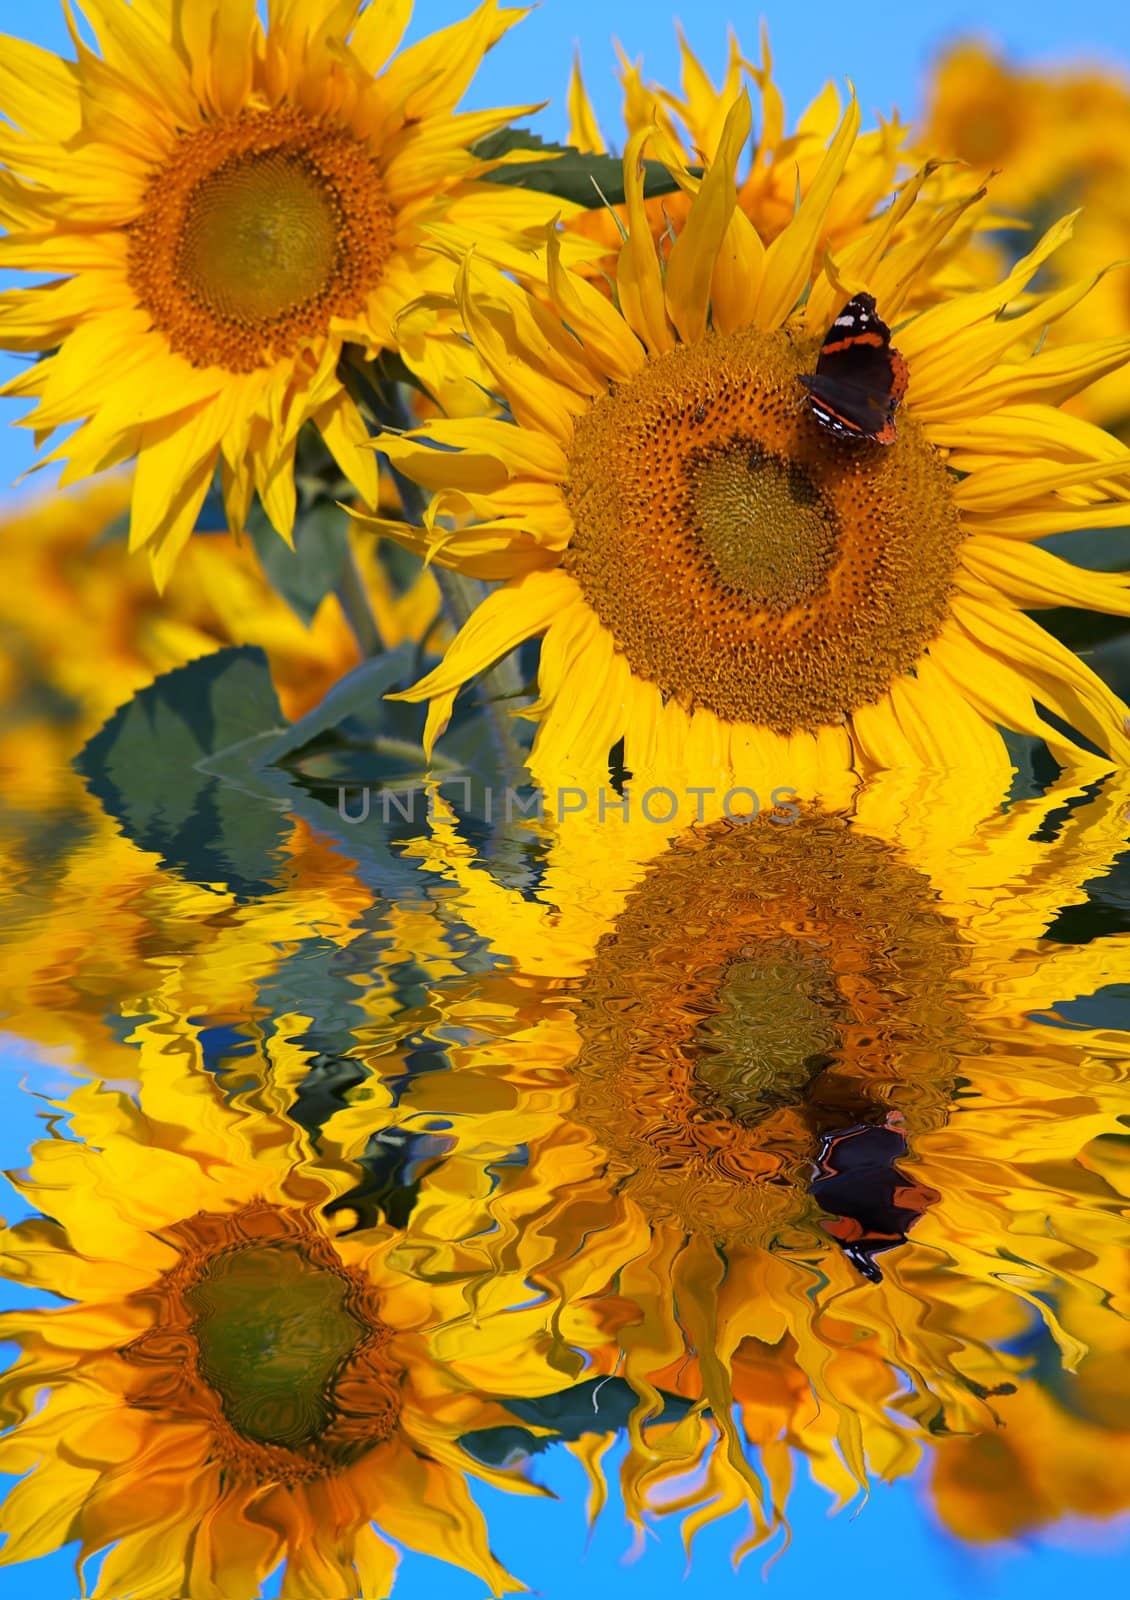 An image of yellow sunflowers and butterfly